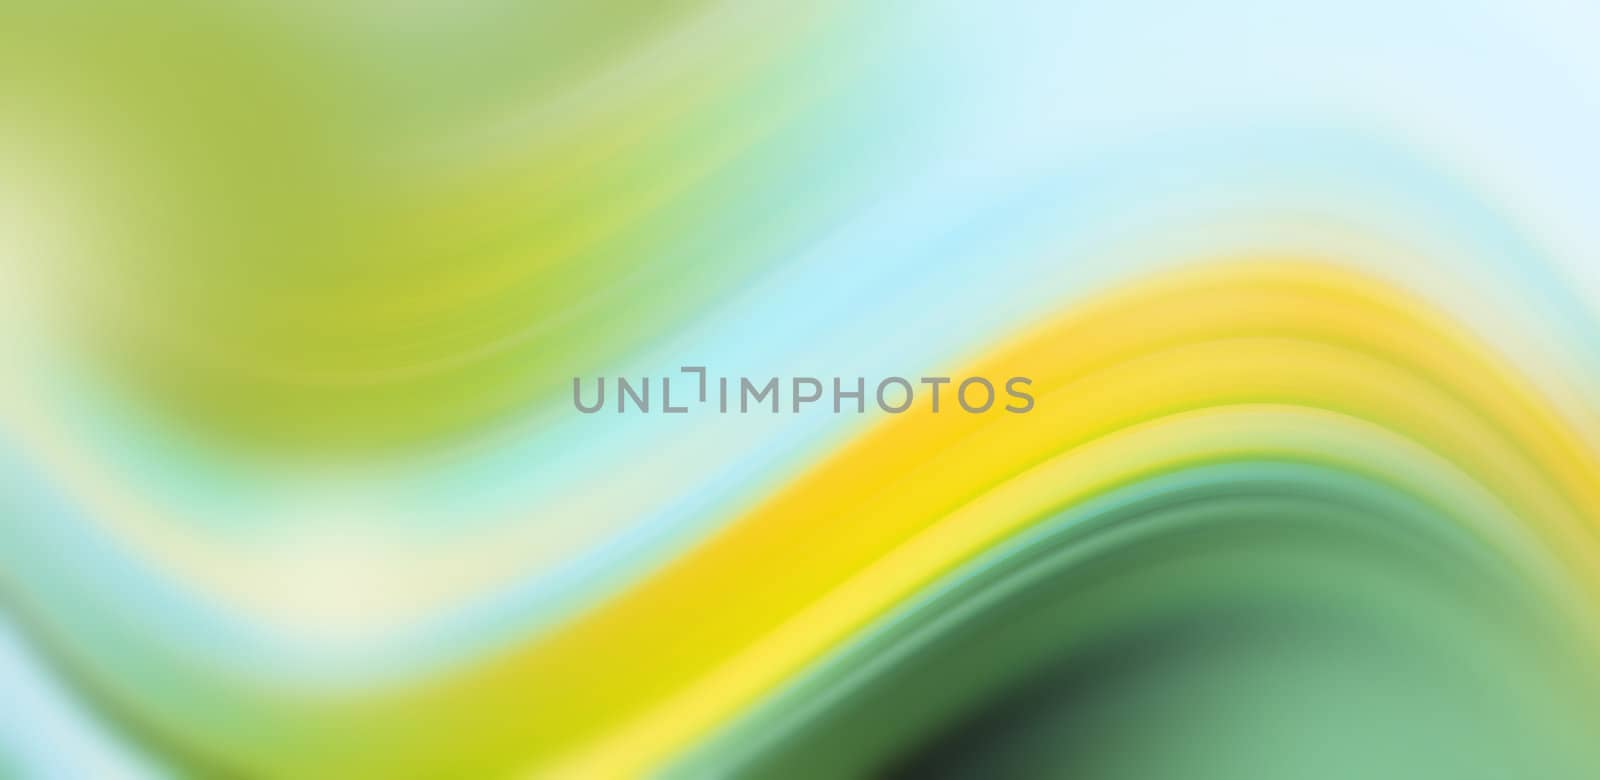 Abstract background image with meshed blurry colors in wave form